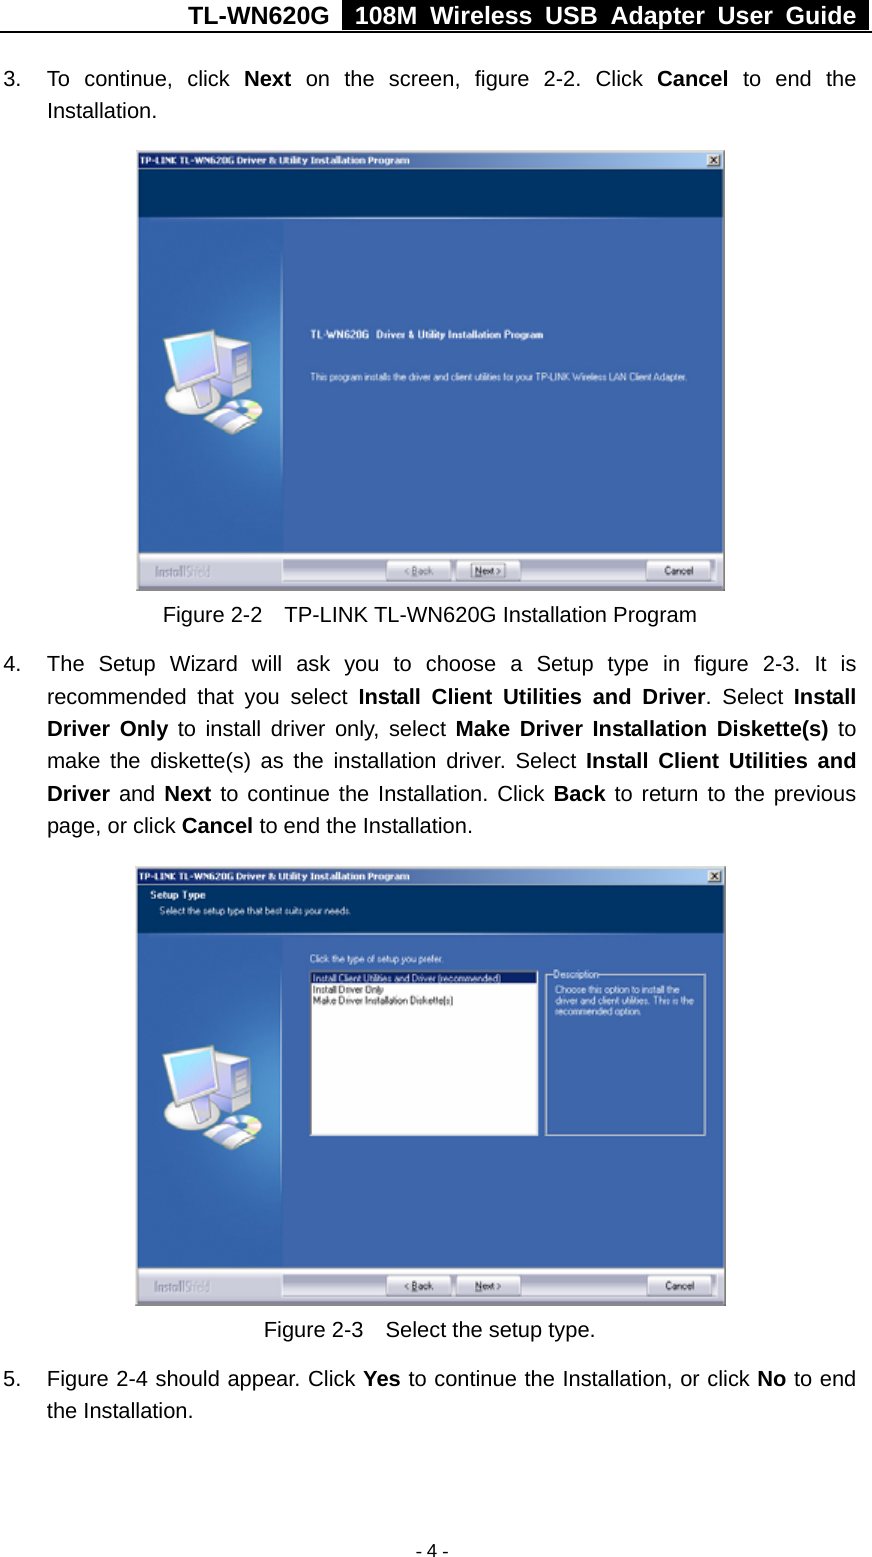 TL-WN620G   108M Wireless USB Adapter User Guide    - 4 -3.  To continue, click Next on the screen, figure 2-2. Click Cancel to end the Installation.   Figure 2-2    TP-LINK TL-WN620G Installation Program 4.  The Setup Wizard will ask you to choose a Setup type in figure 2-3. It is recommended that you select Install Client Utilities and Driver. Select Install Driver Only to install driver only, select Make Driver Installation Diskette(s) to make the diskette(s) as the installation driver. Select Install Client Utilities and Driver and Next to continue the Installation. Click Back to return to the previous page, or click Cancel to end the Installation.  Figure 2-3    Select the setup type. 5.  Figure 2-4 should appear. Click Yes to continue the Installation, or click No to end the Installation. 